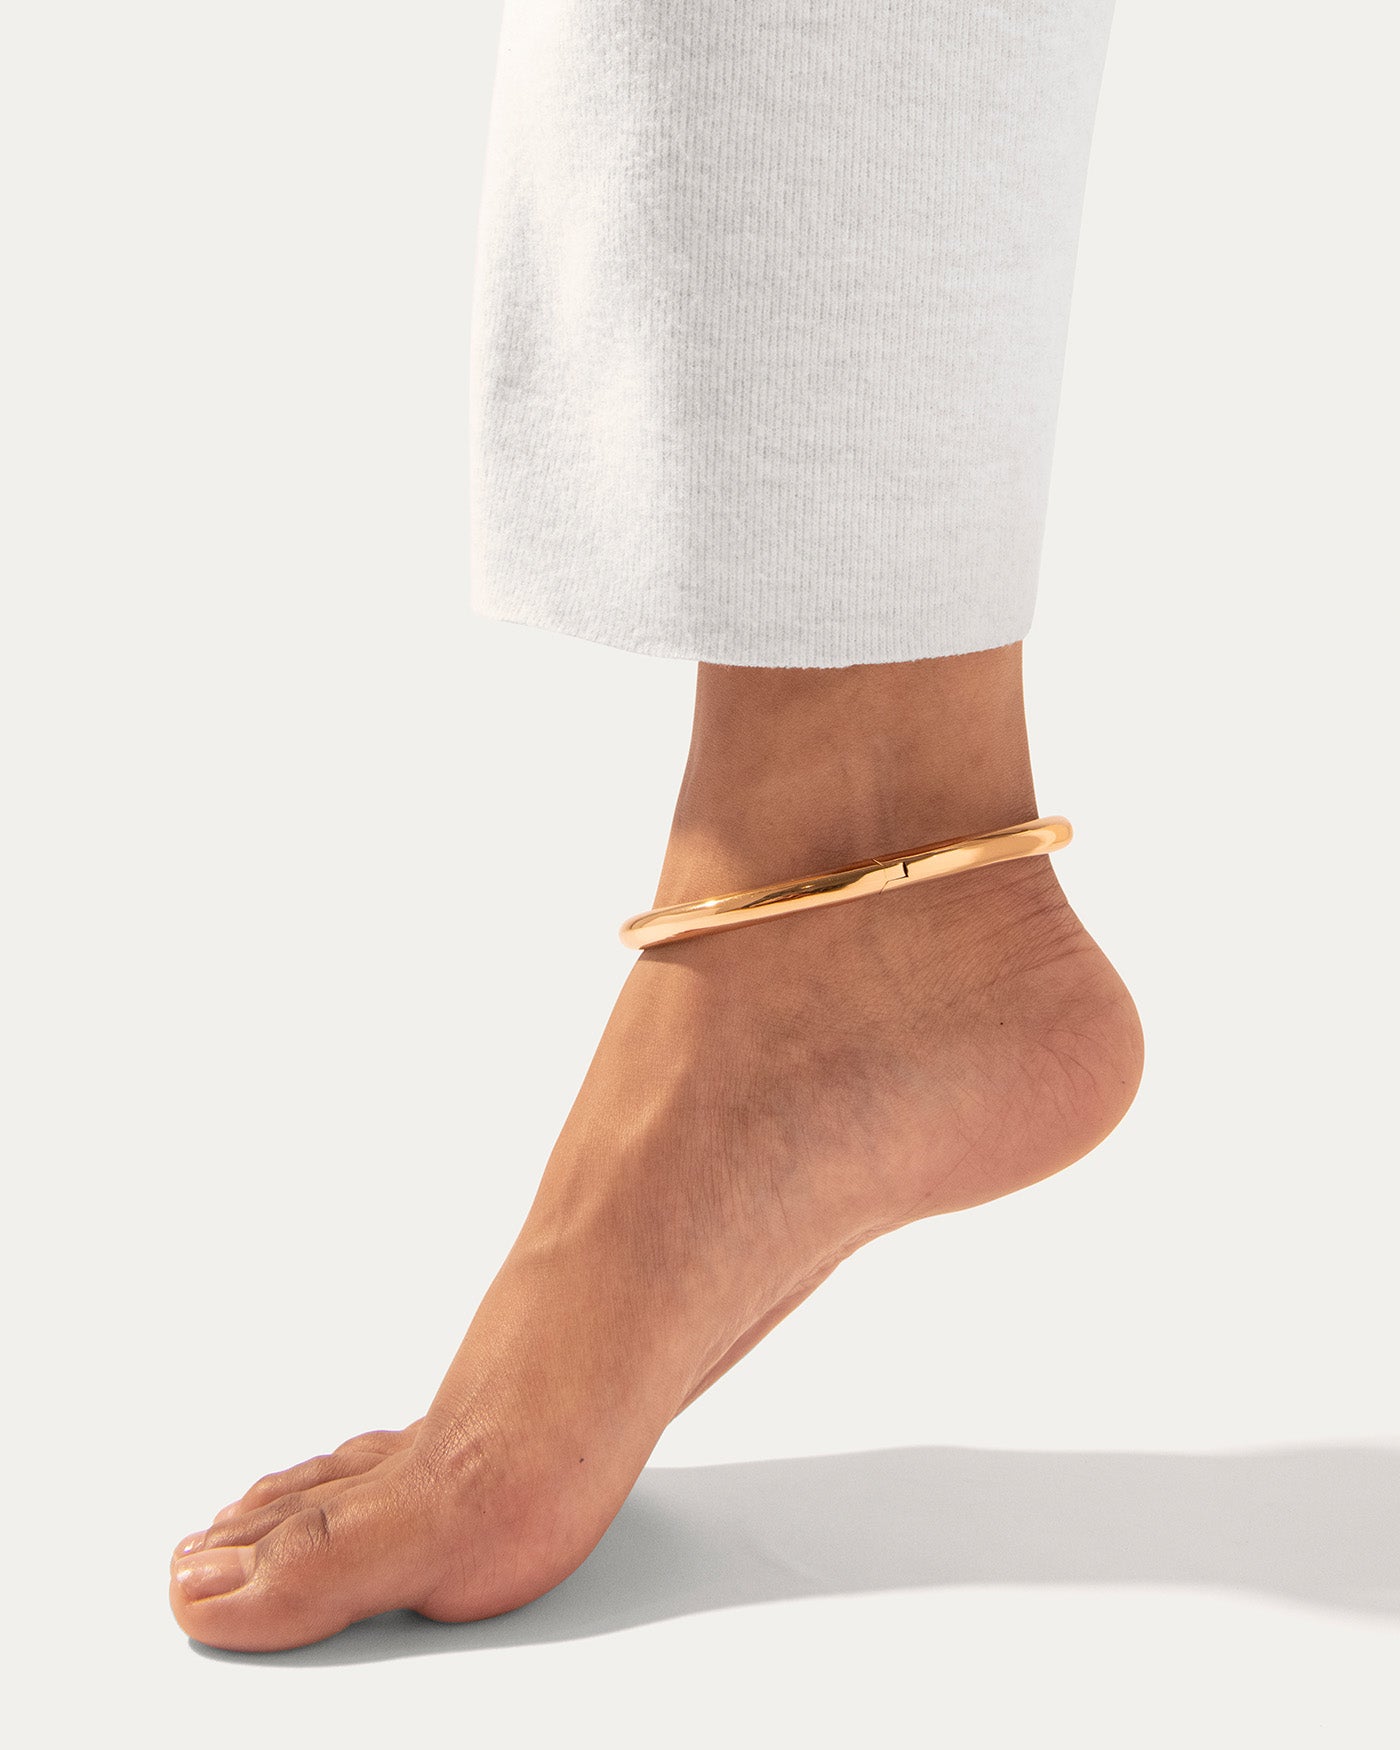 Indian Style Ankle Bracelet with Crystals by Nelipots – NELIPOTS